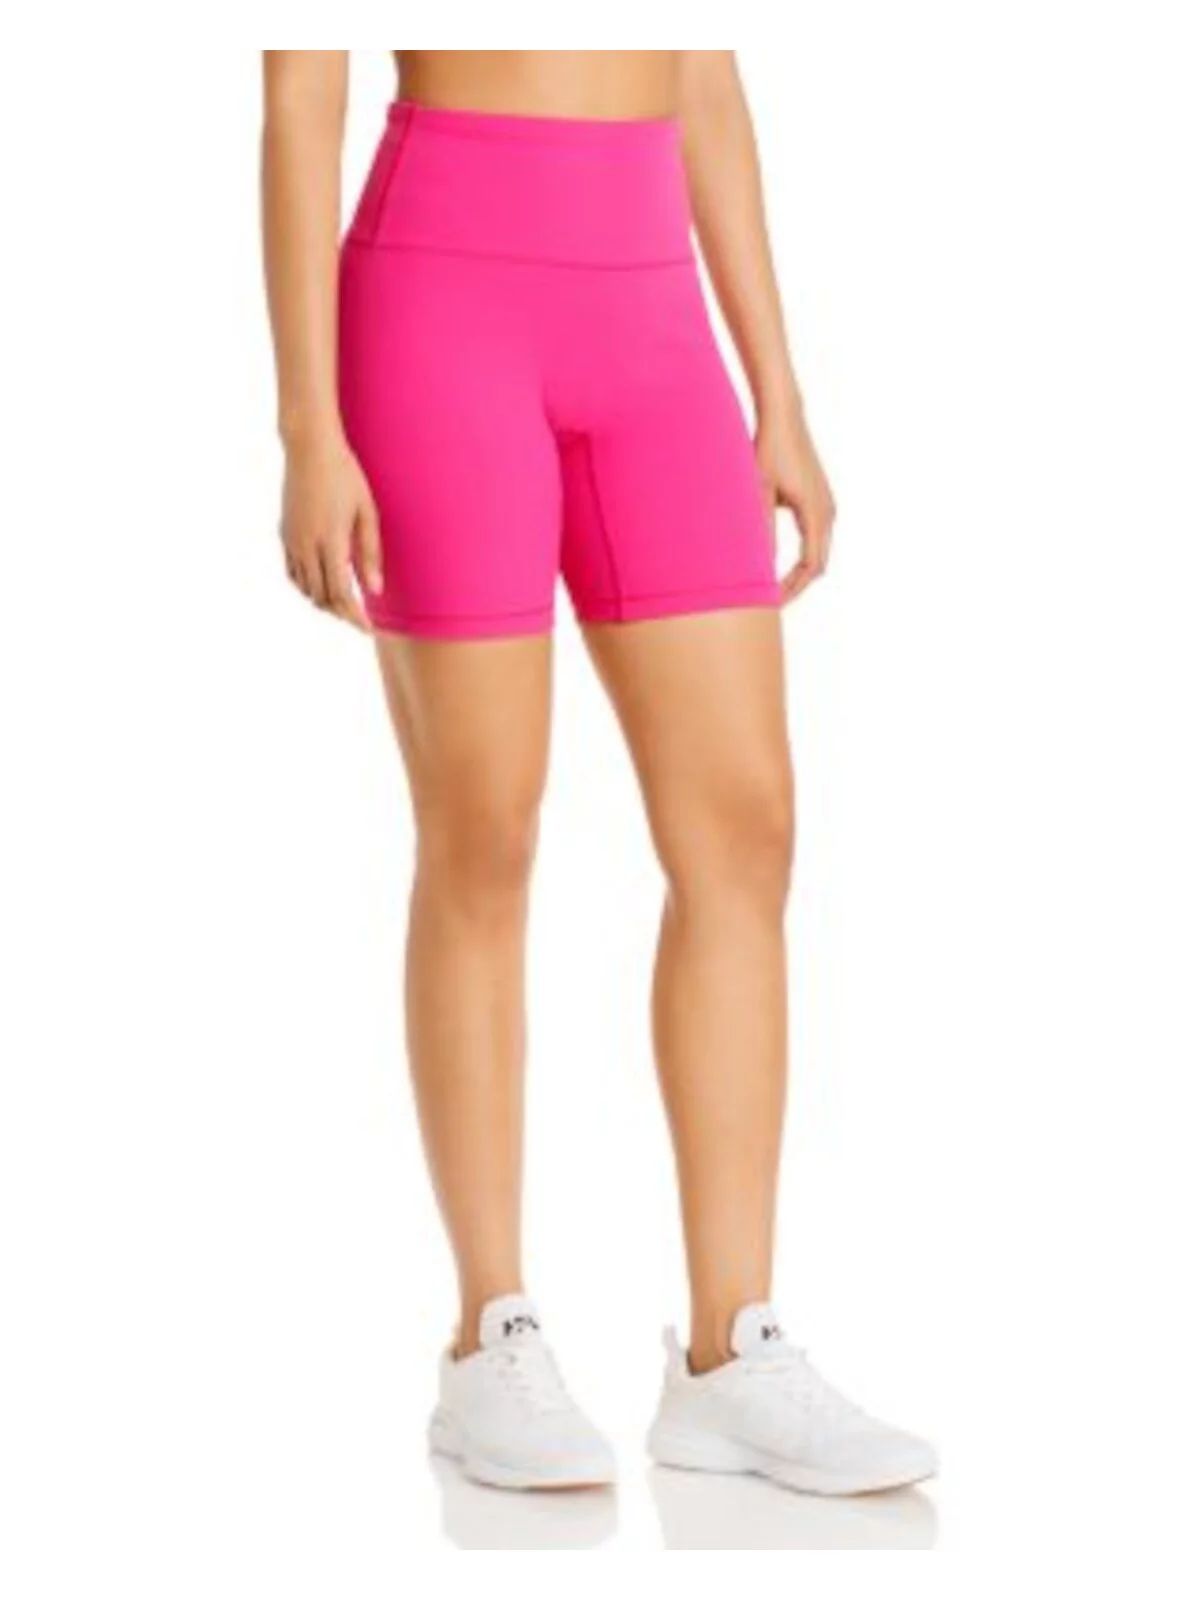 SOLID & STRIPED SPORT Womens Pink Stretch Ribbed Fitted Bike Active Wear High Waist Shorts S | Walmart (US)